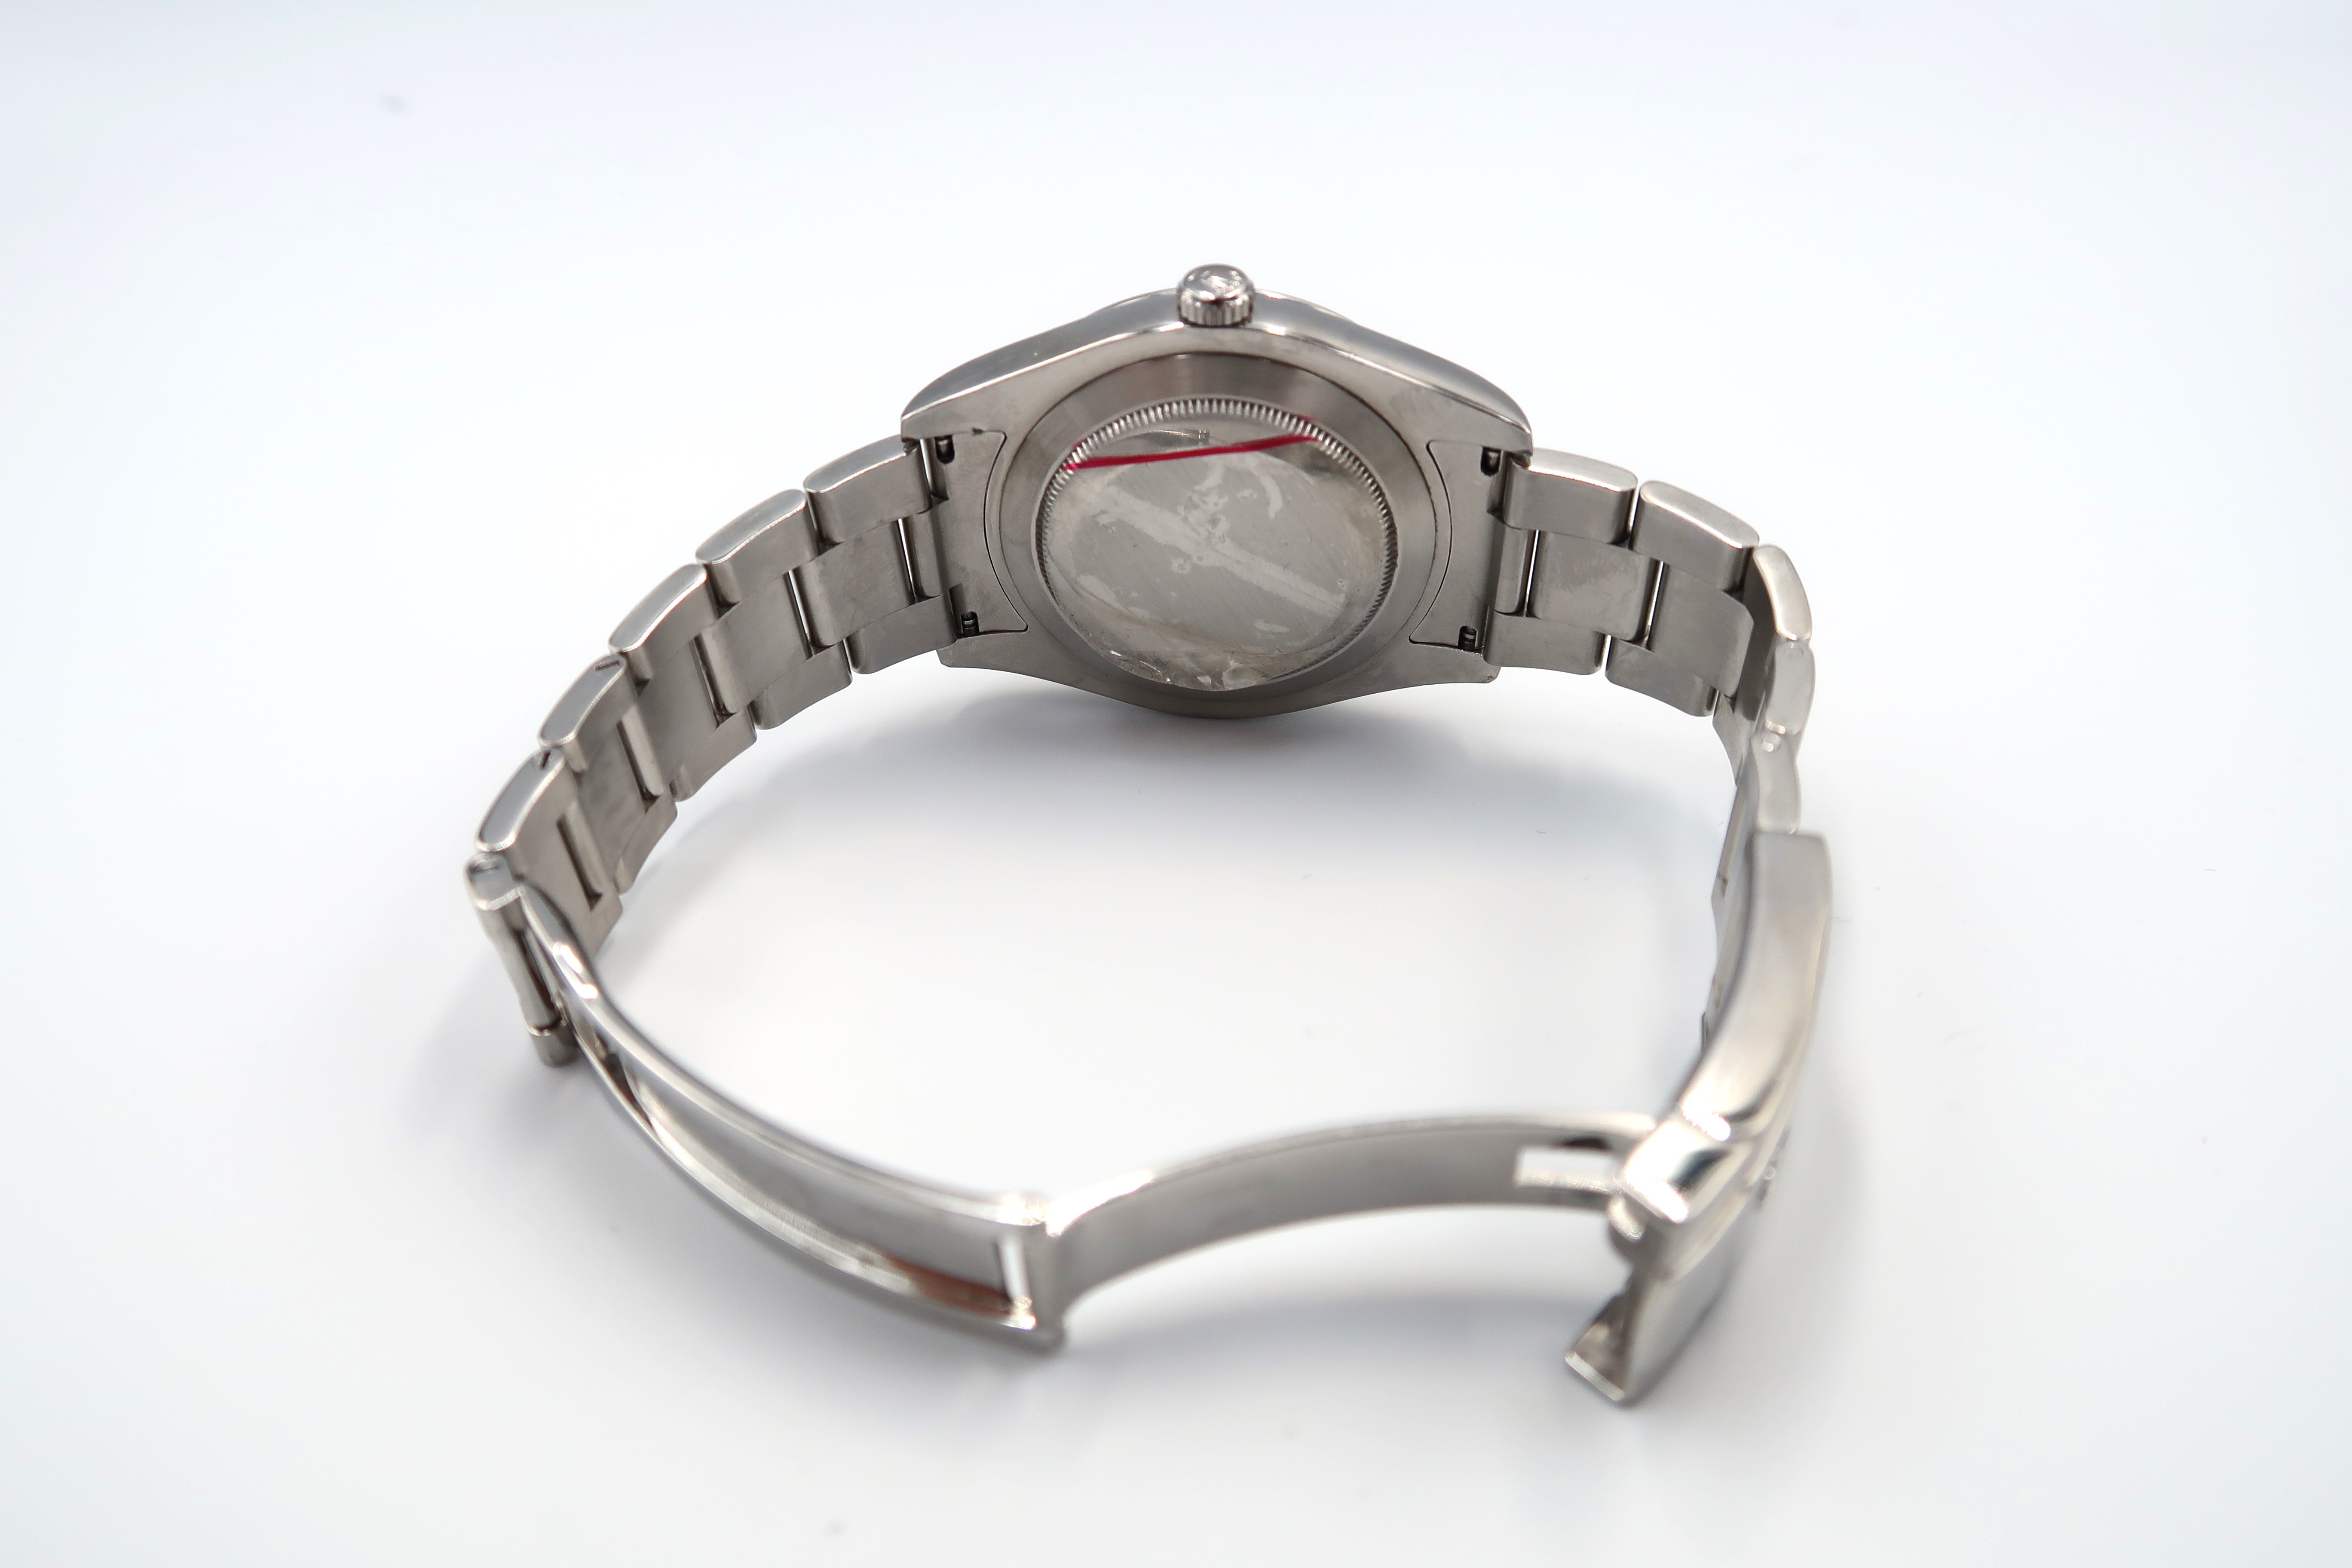 A Rolex Oyster Perpetual Datejust stainless steel wristwatch - Image 6 of 9